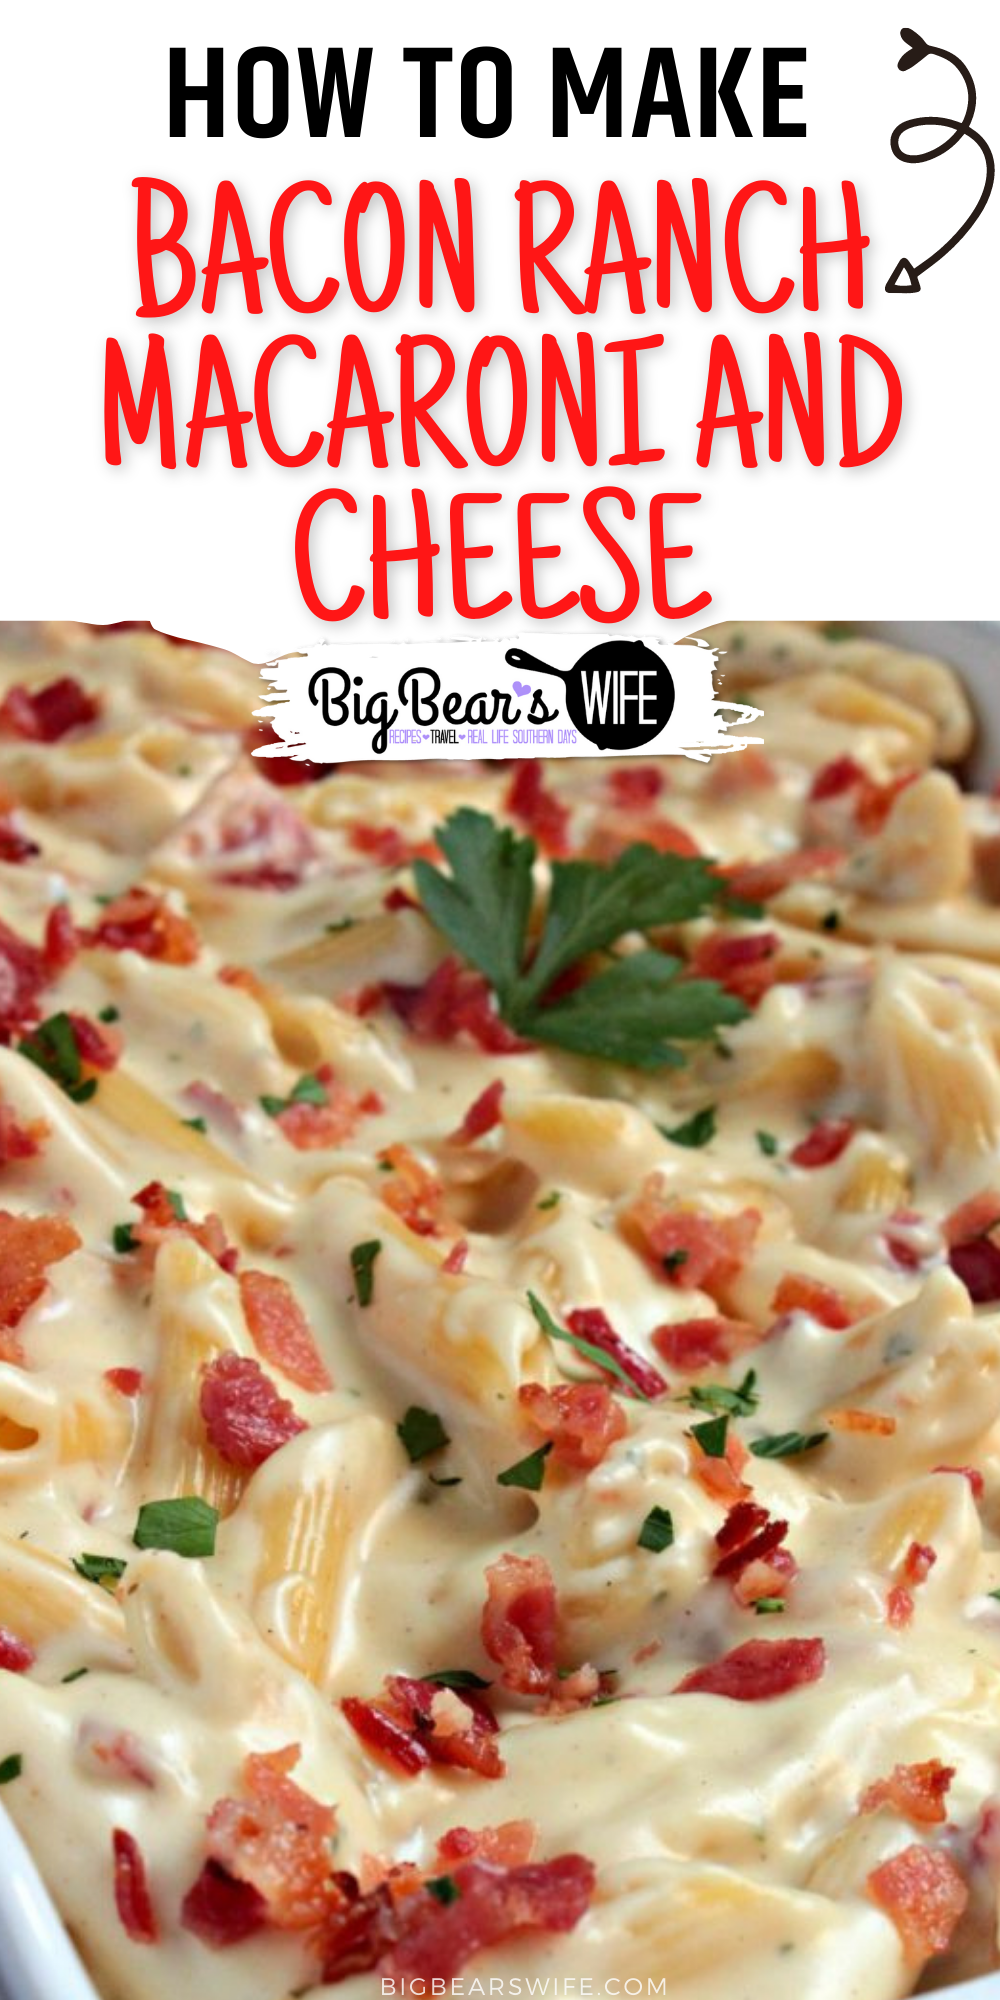 Bacon Ranch Macaroni and Cheese - A side dish with a bacon ranch kick! Make this Bacon Ranch Macaroni and Cheese tonight with dinner or add in some rotisserie chicken to make it a full meal! via @bigbearswife